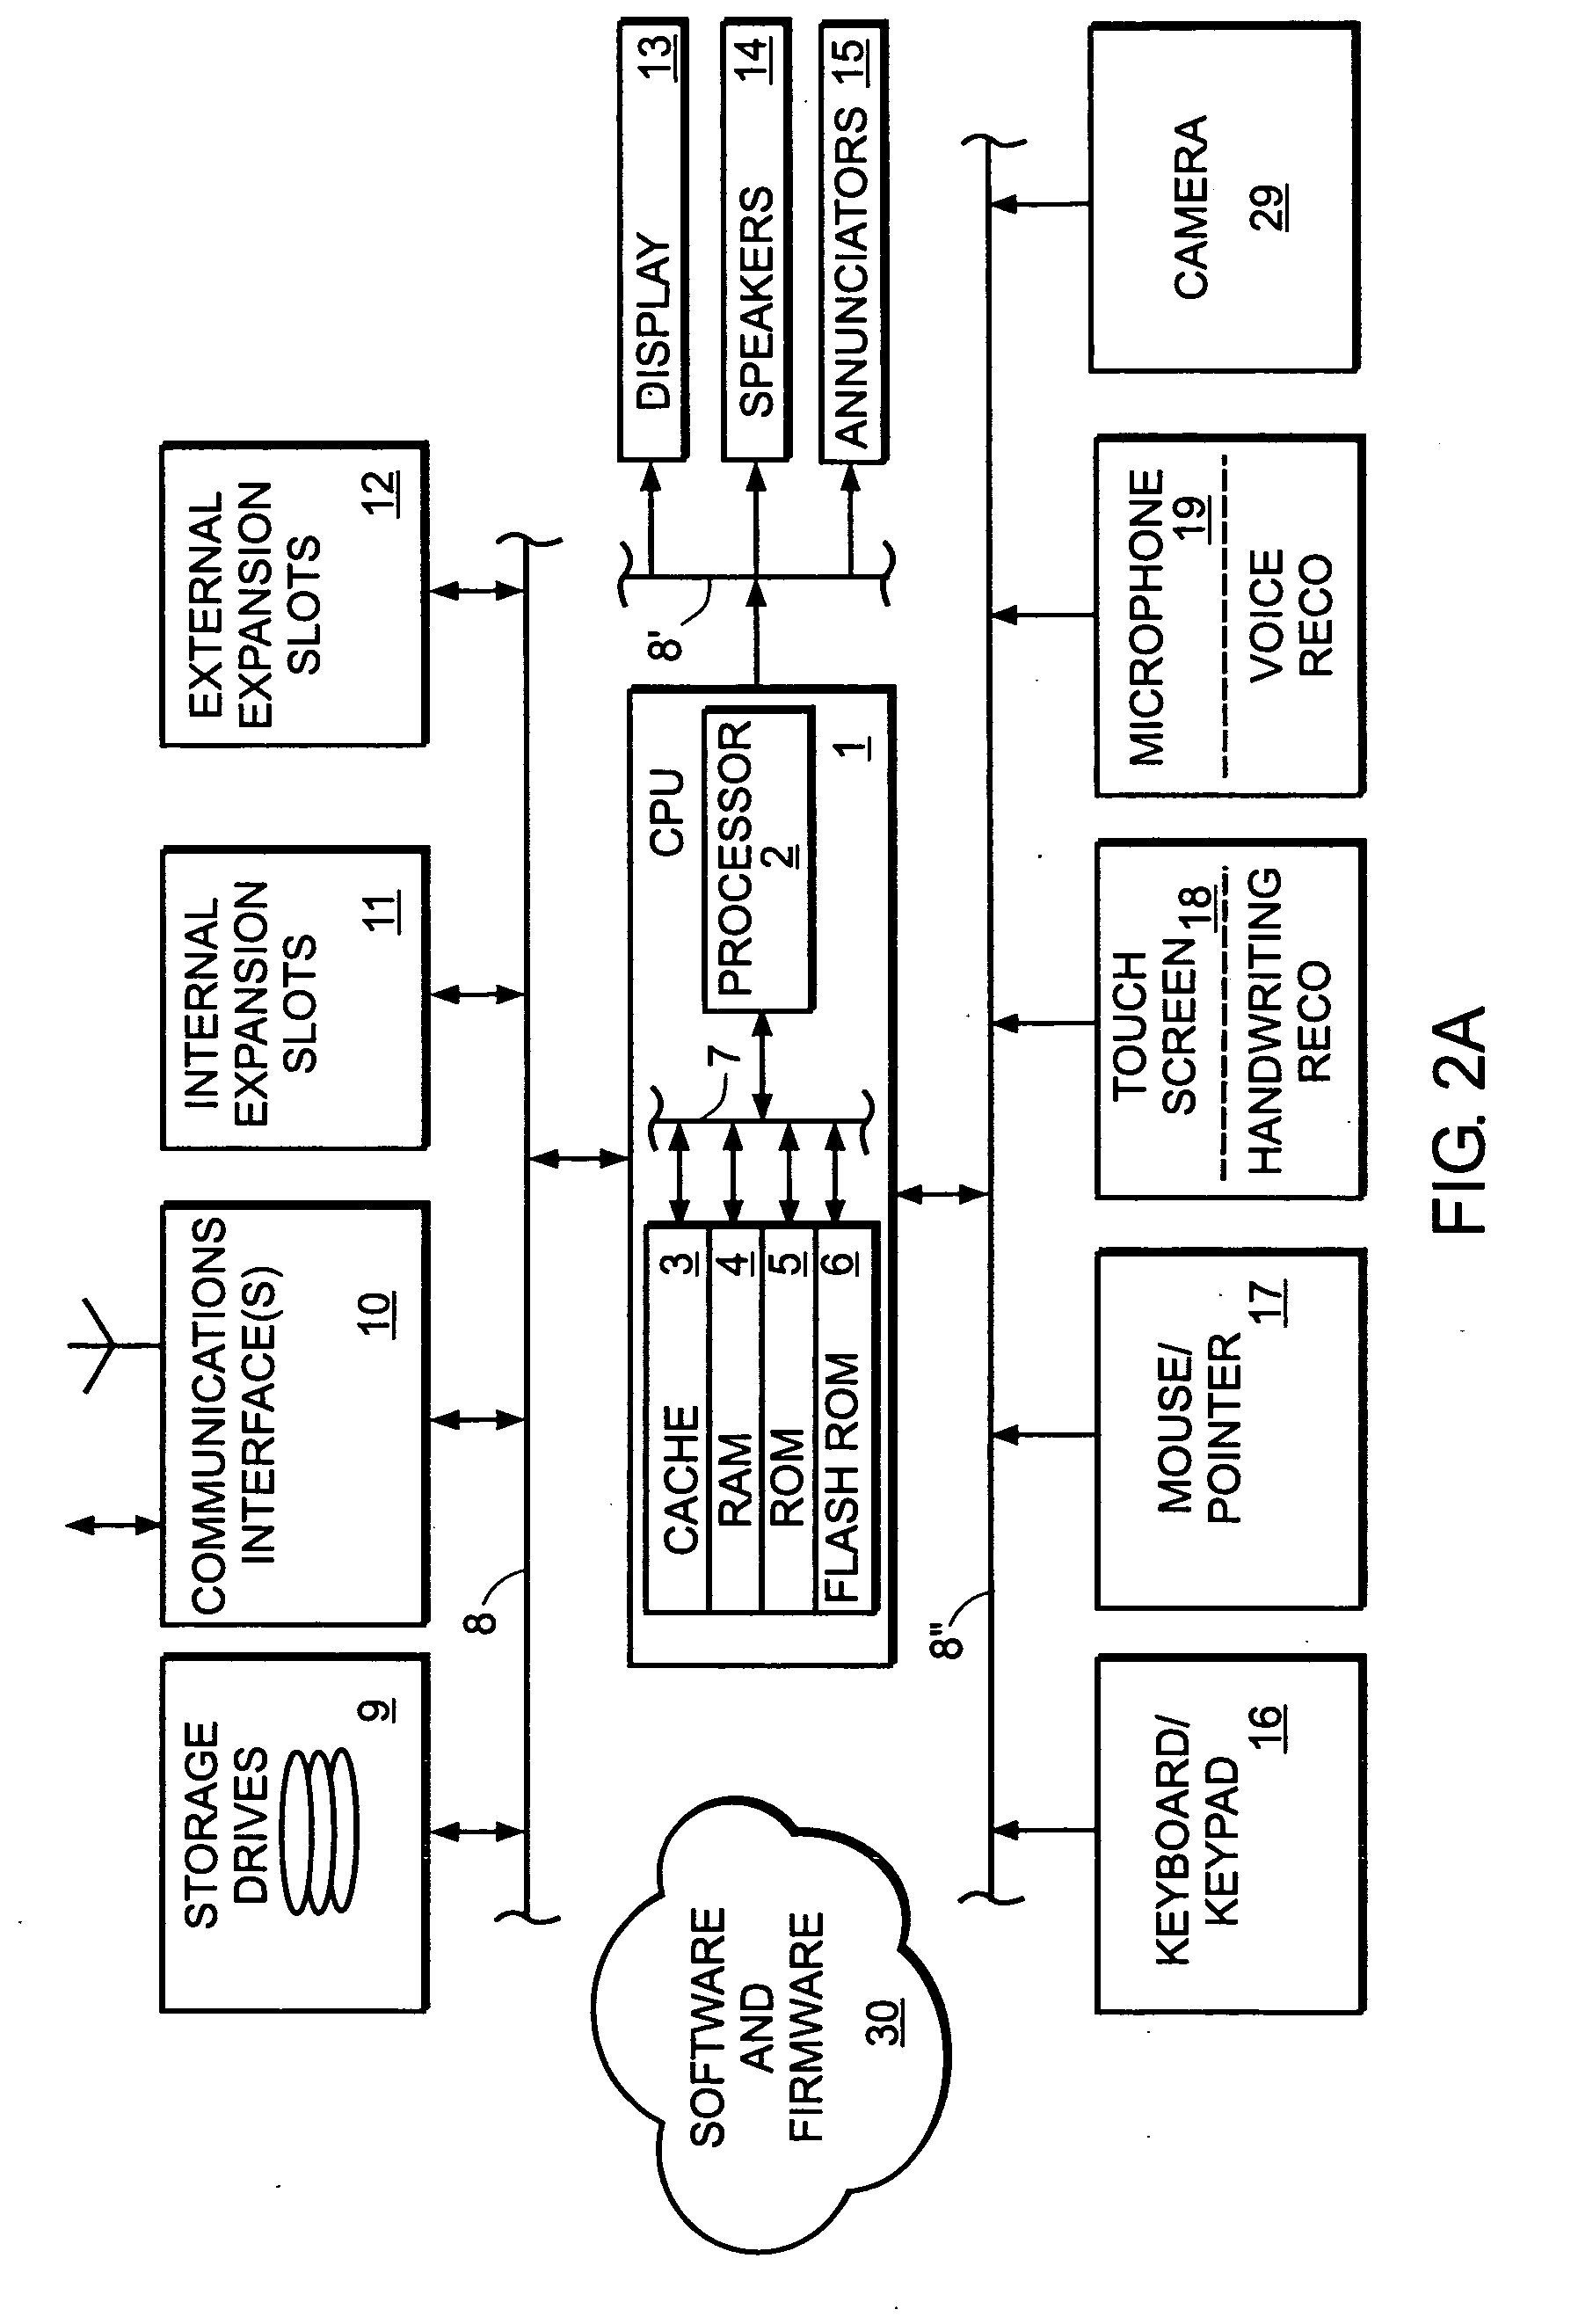 System and methods for client and template validation